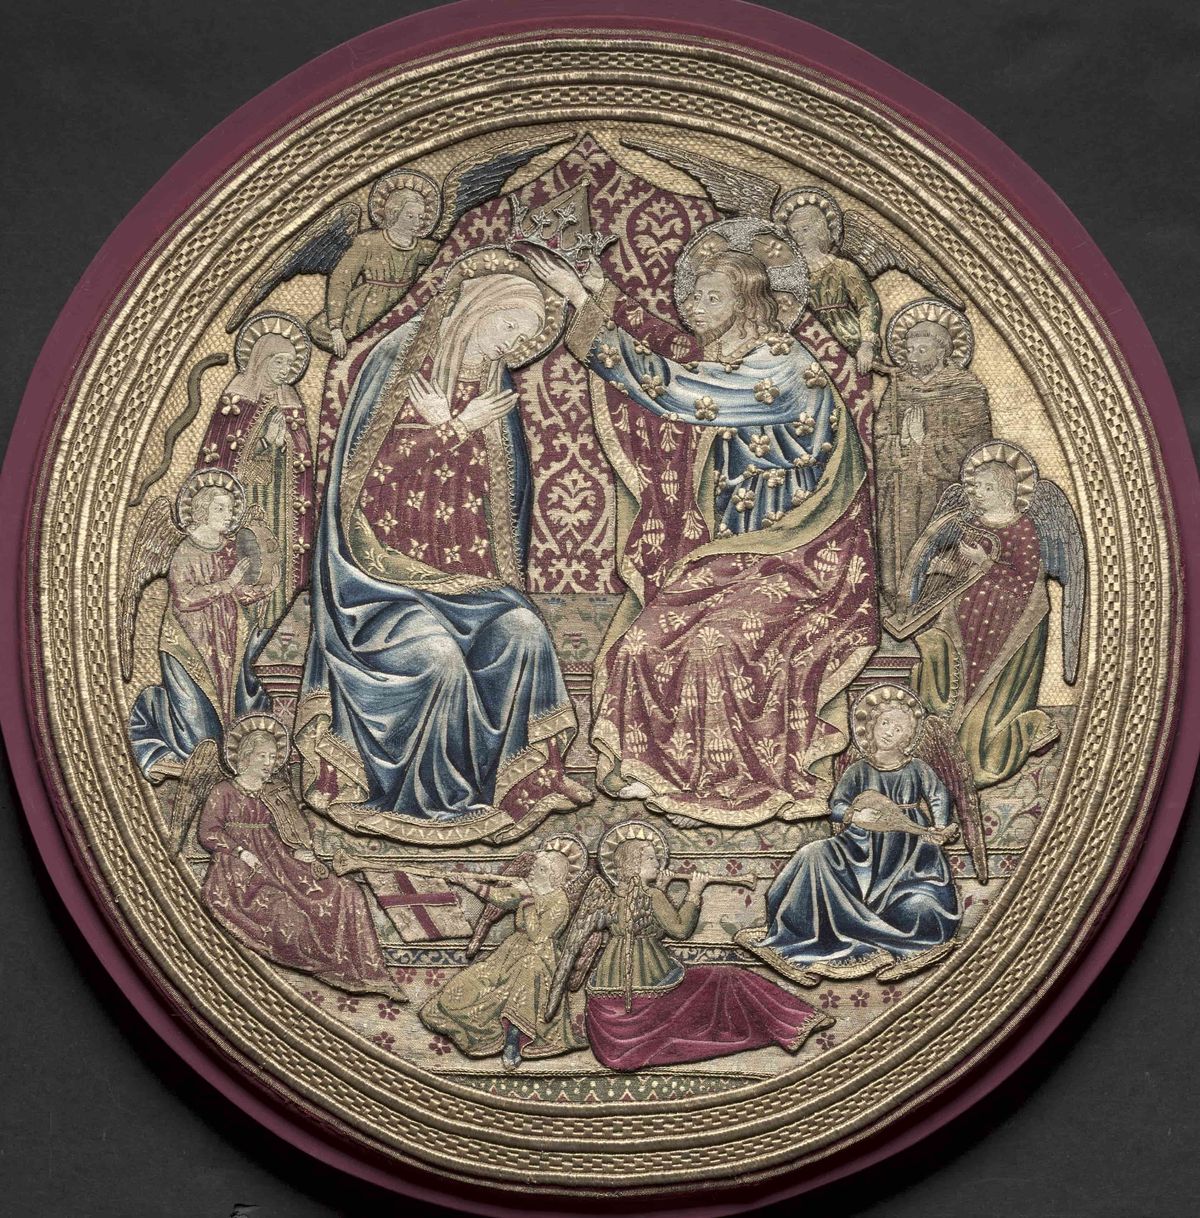 Embroidered Tondo from an Altar Frontal: The Coronation of the Virgin (1459, Italy, Florence) - Catholic Stock Photo